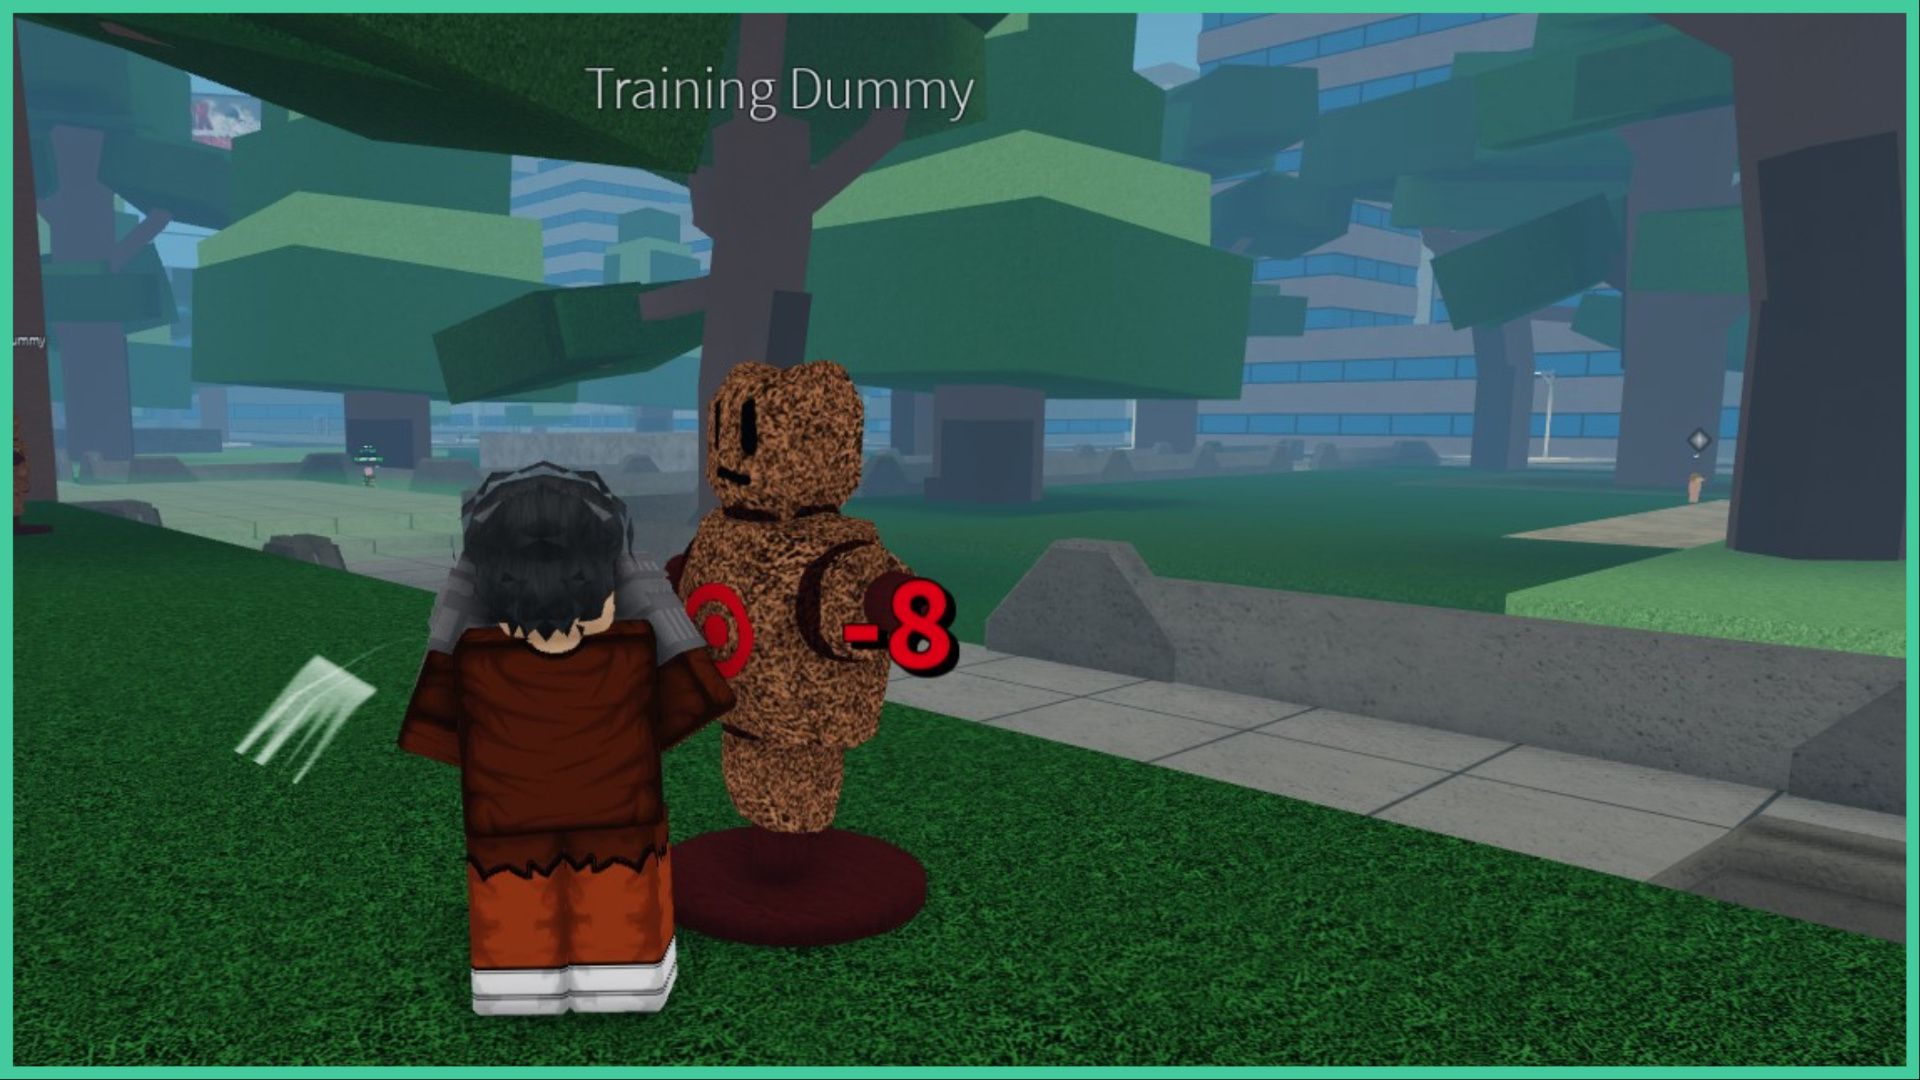 feature image for our project xl evolved abilities guide, the image features a roblox player attacking a dummy with a target on its torso as the player wields iron gloves on their hands, they are surrounded by grassy fields, a stone pavement, and trees, with a city in the distance consisting of tall windowed buildings